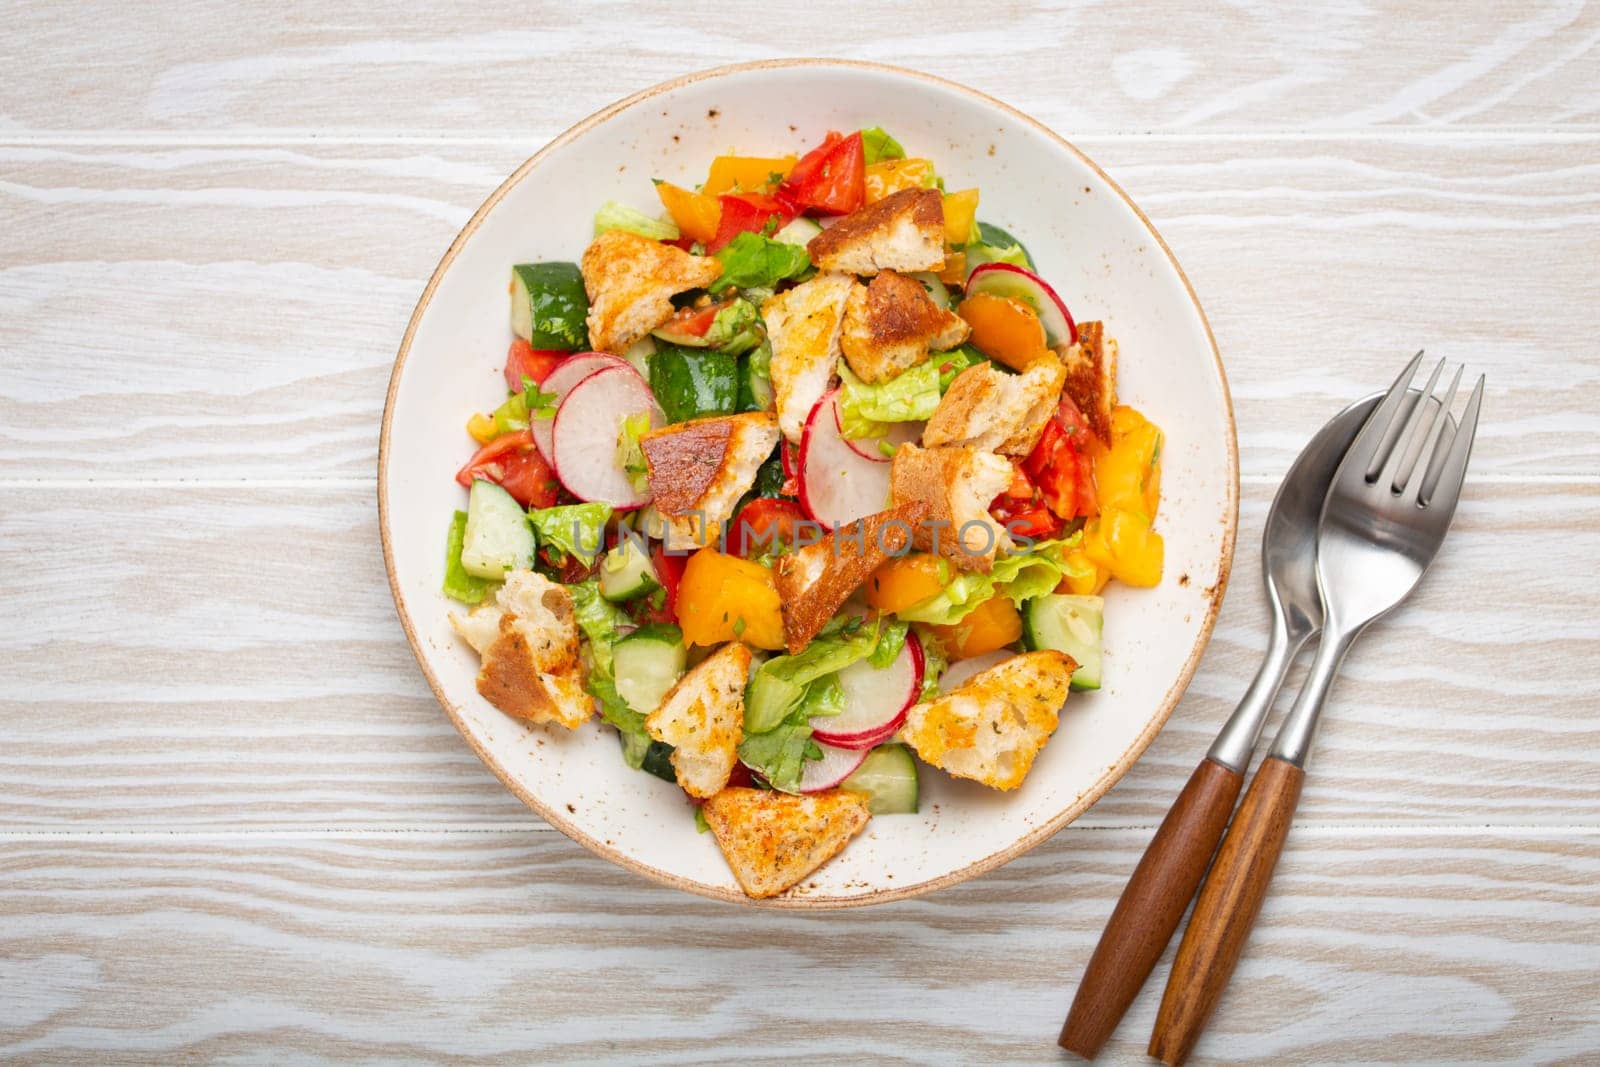 Traditional Levant dish Fattoush salad, Arab cuisine, with pita bread croutons, vegetables, herbs. Healthy Middle Eastern vegetarian salad, rustic wooden white background top view by its_al_dente